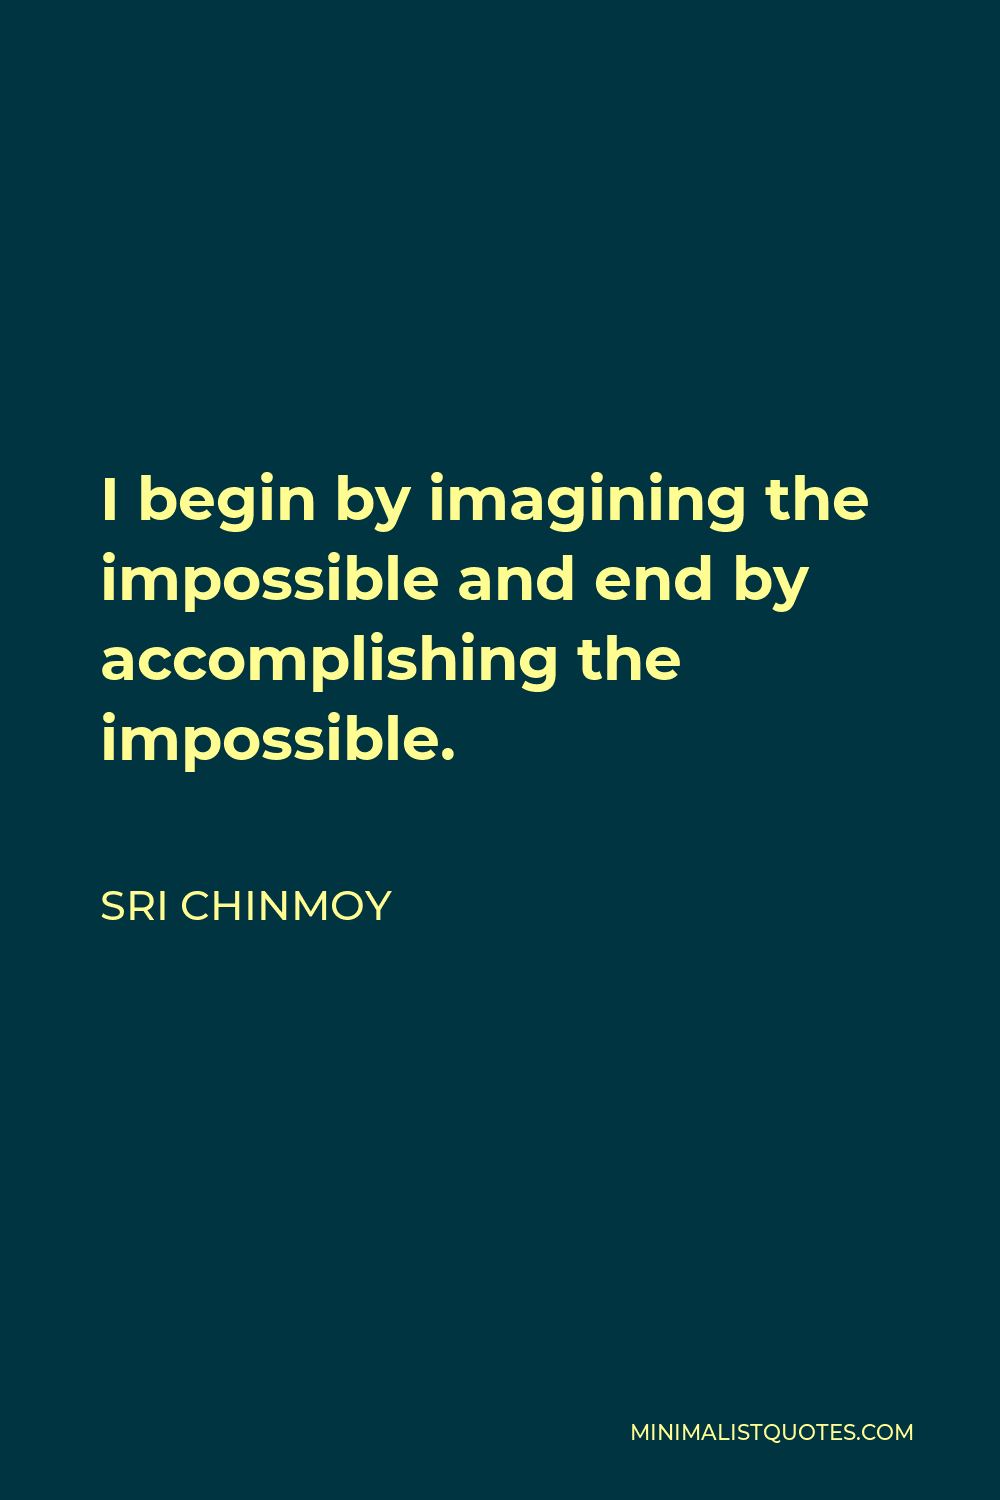 Sri Chinmoy Quote - I begin by imagining the impossible and end by accomplishing the impossible.